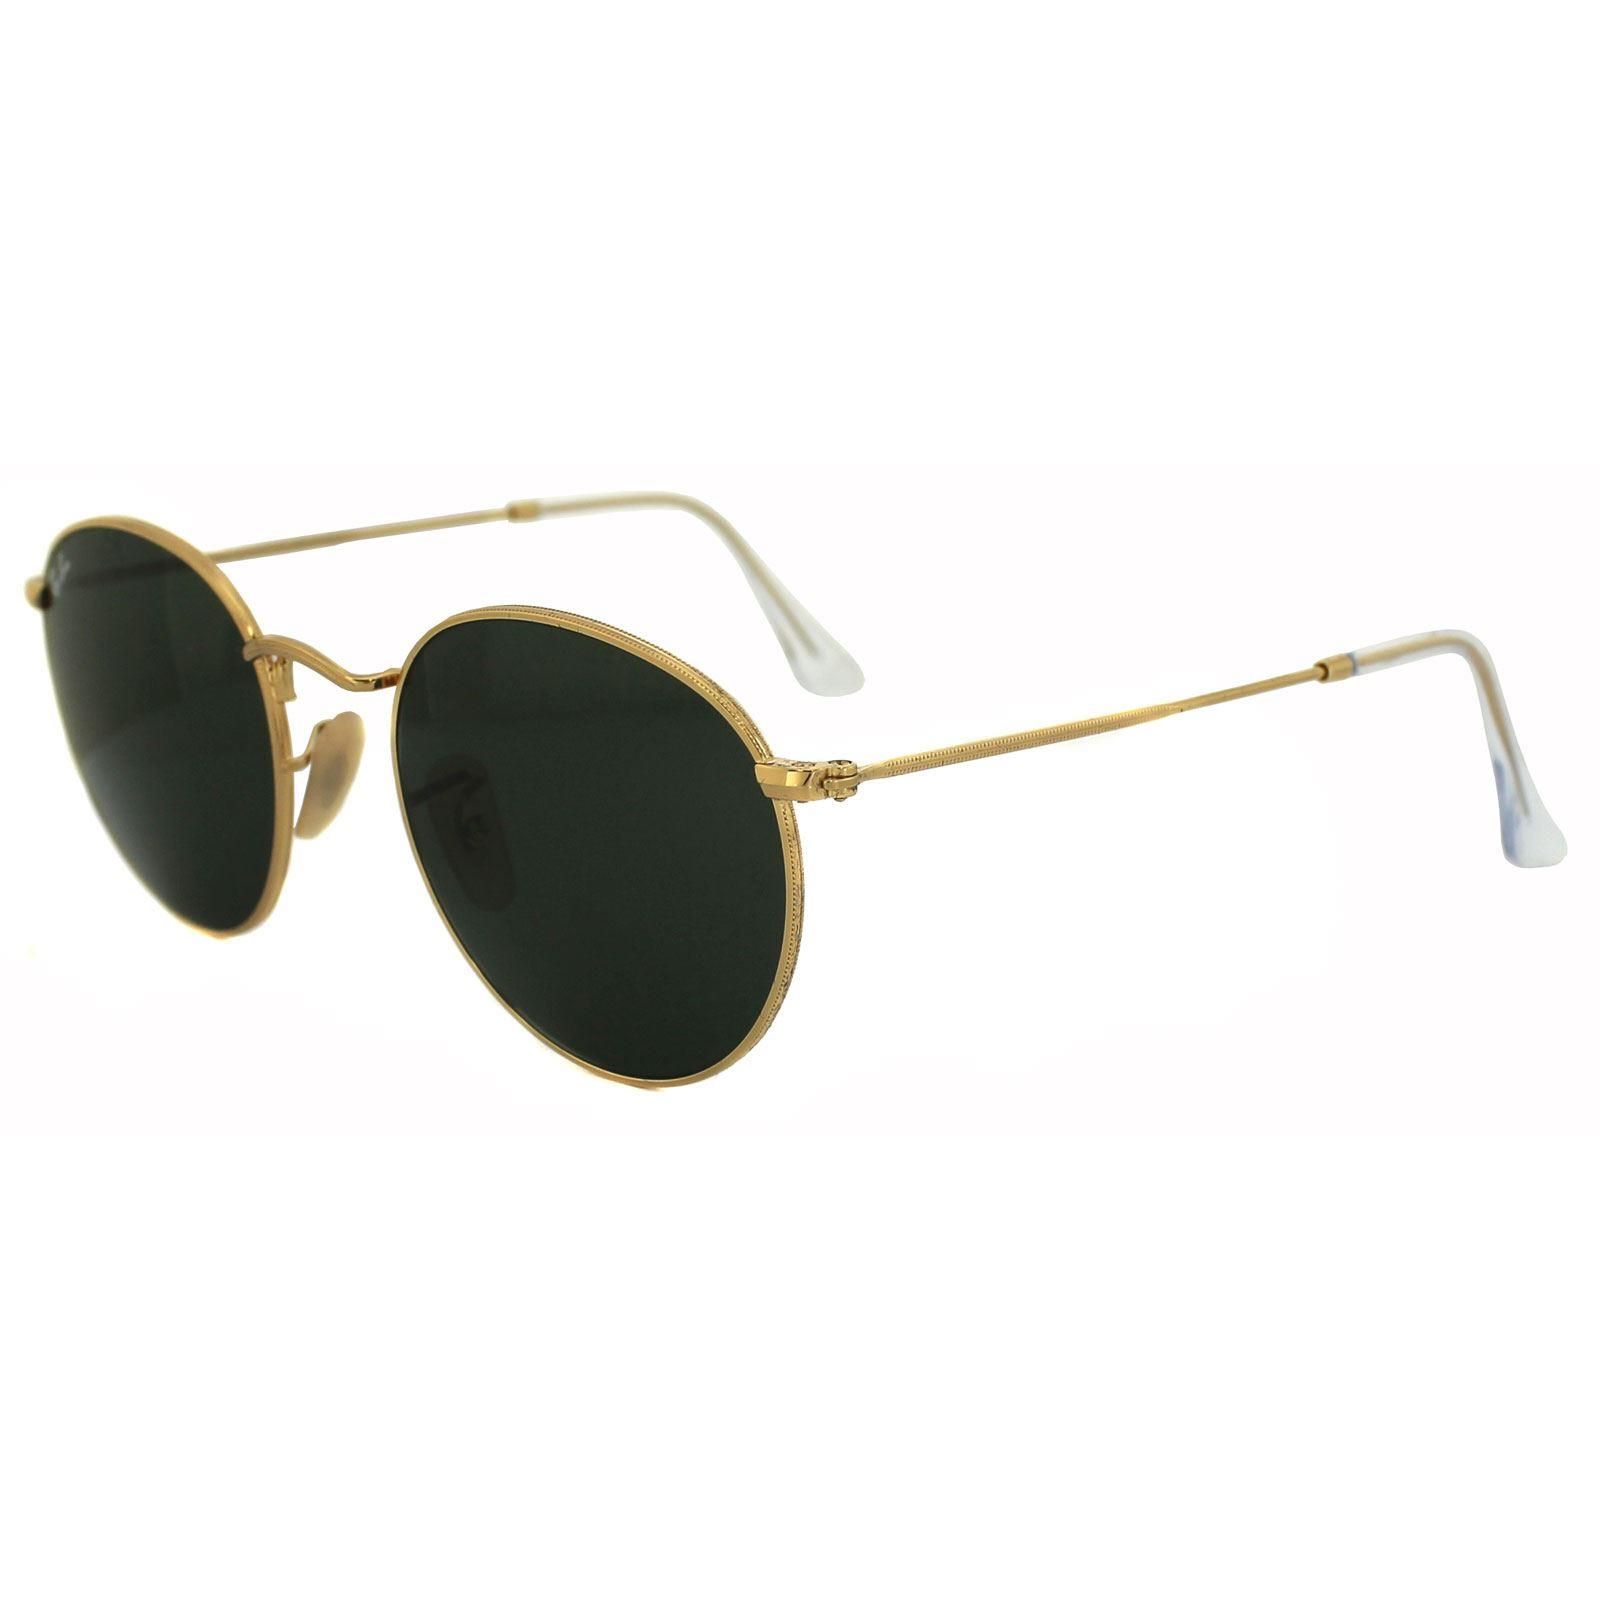 Ray-Ban Sunglasses Round Metal 3447 001 Gold Green 47mm are a rock and roll edged shades taking their inspiration from John Lennon and many other rock stars who have worn this shape since. Round and quirky makes for an awesome sunglass that transcends any fashion trends